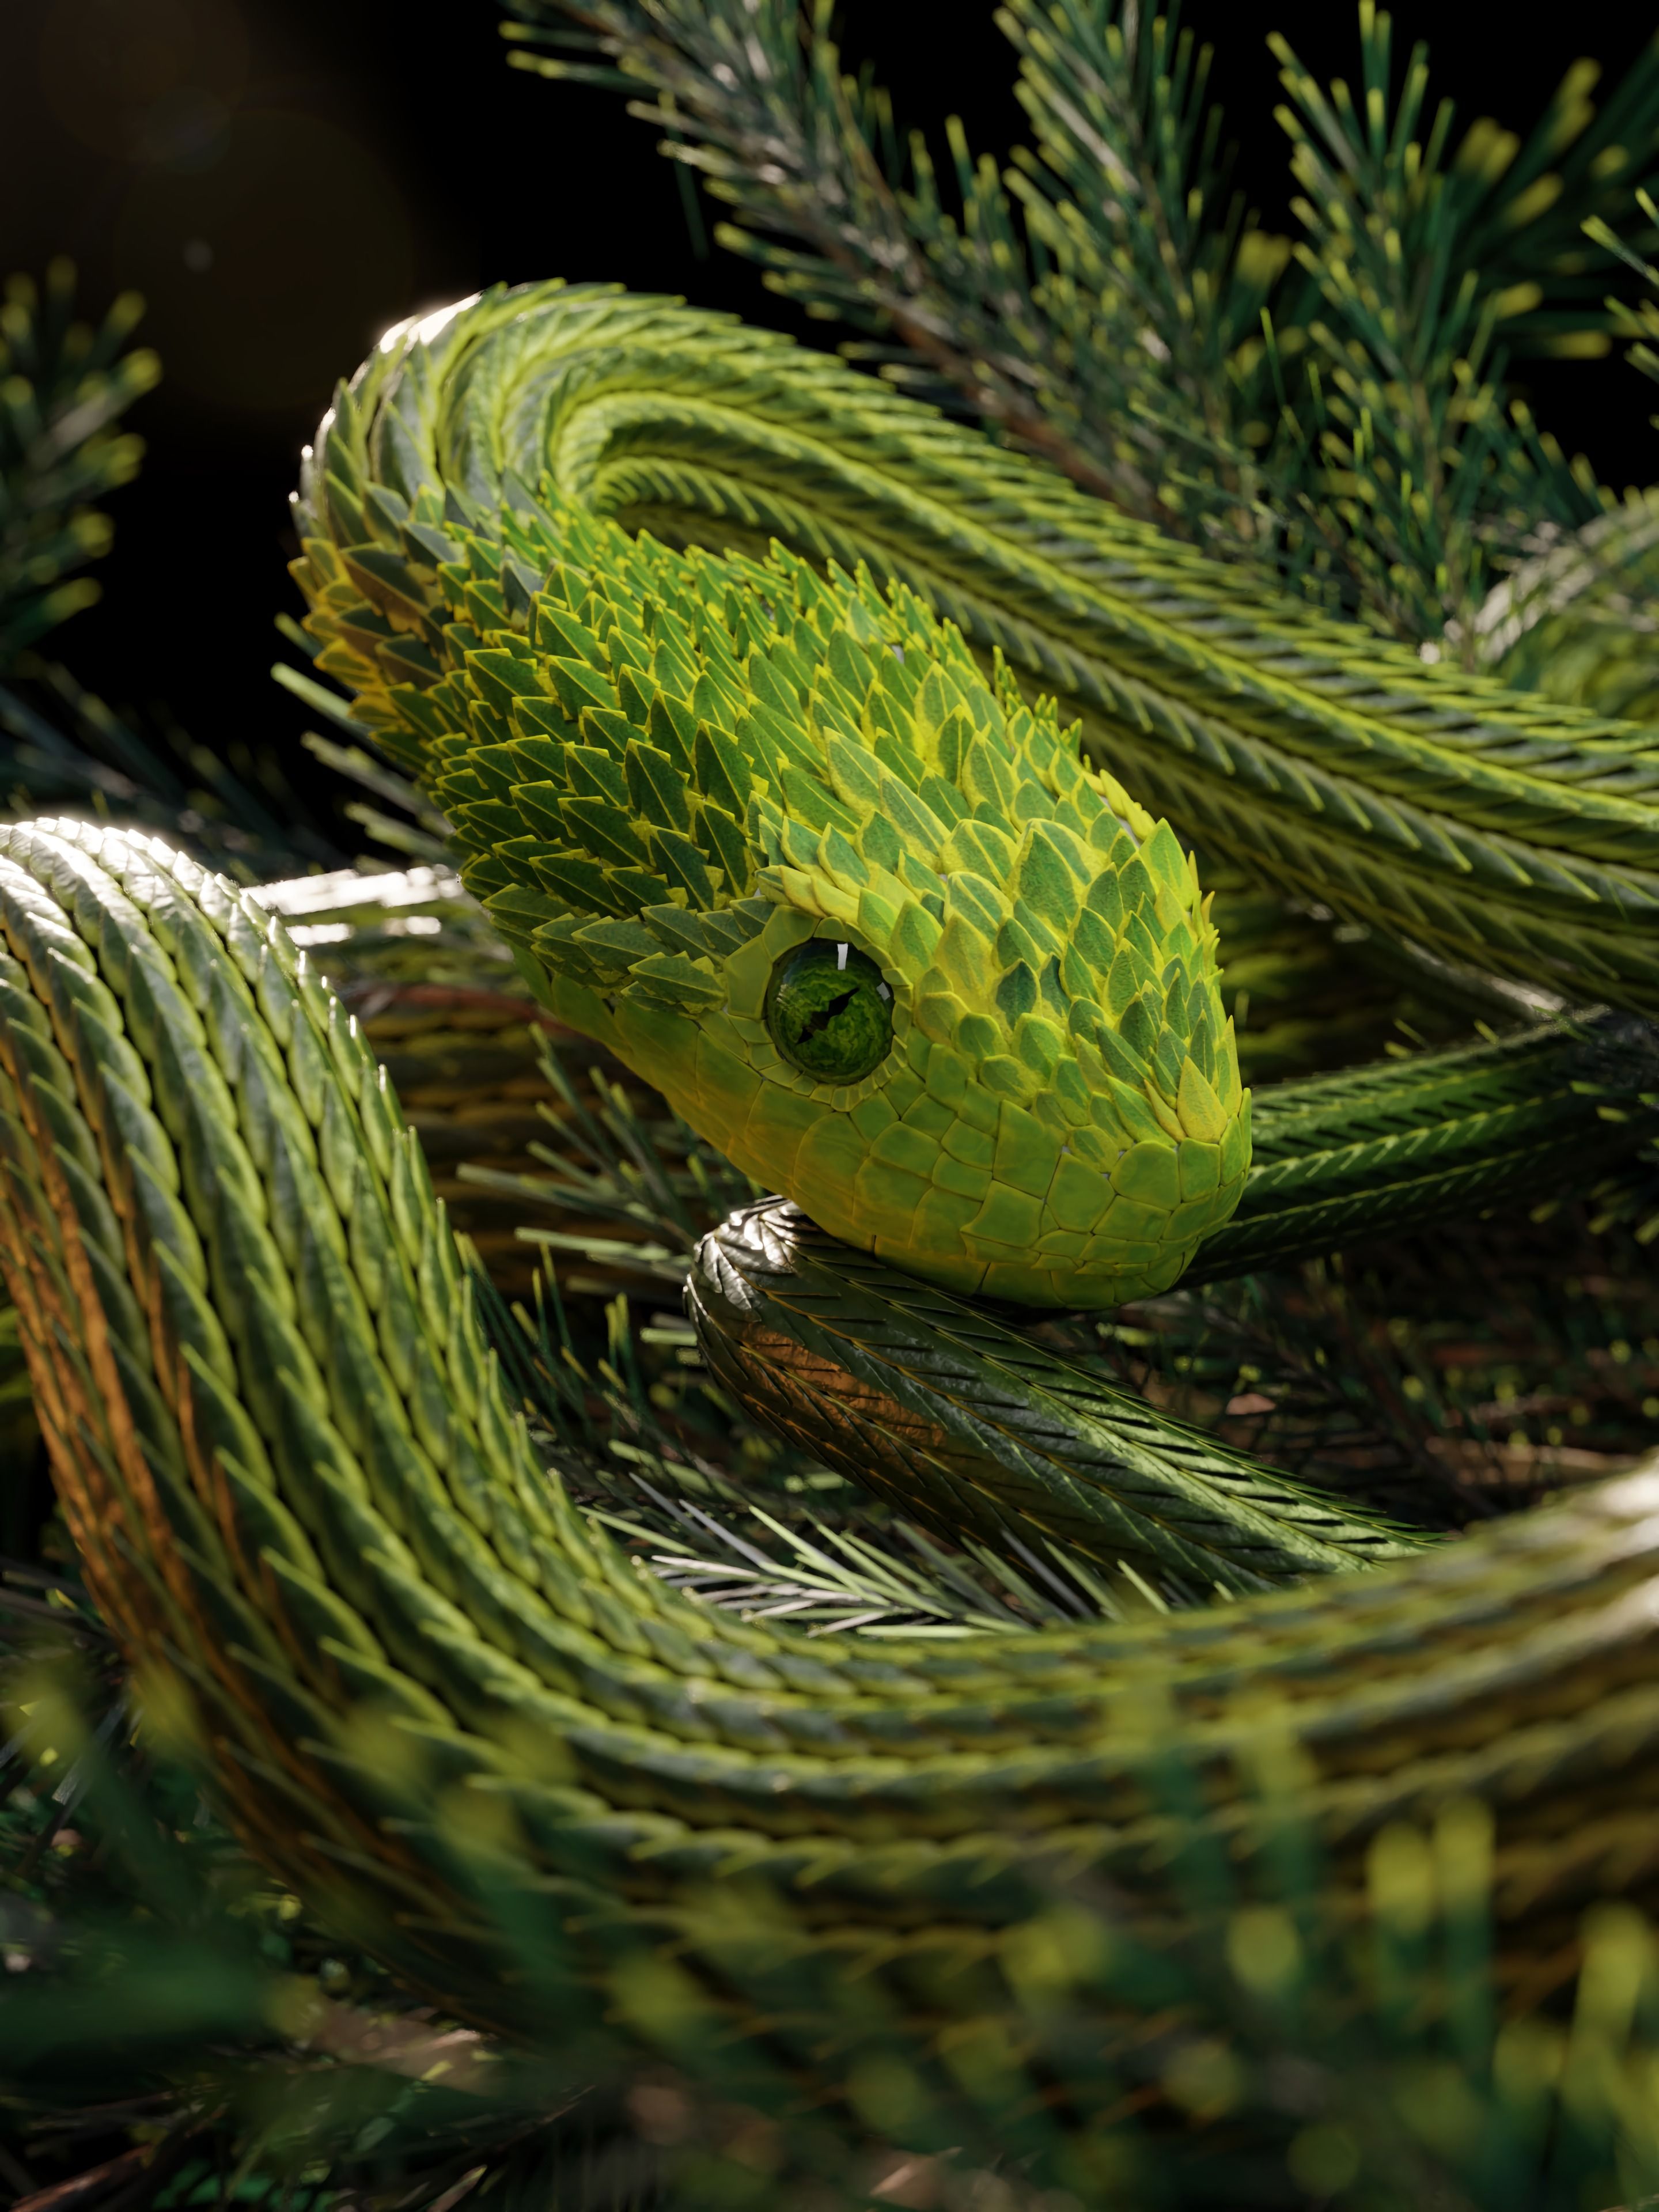 Download wallpaper 2880x3840 snake, green, reptile, scales, 3D HD